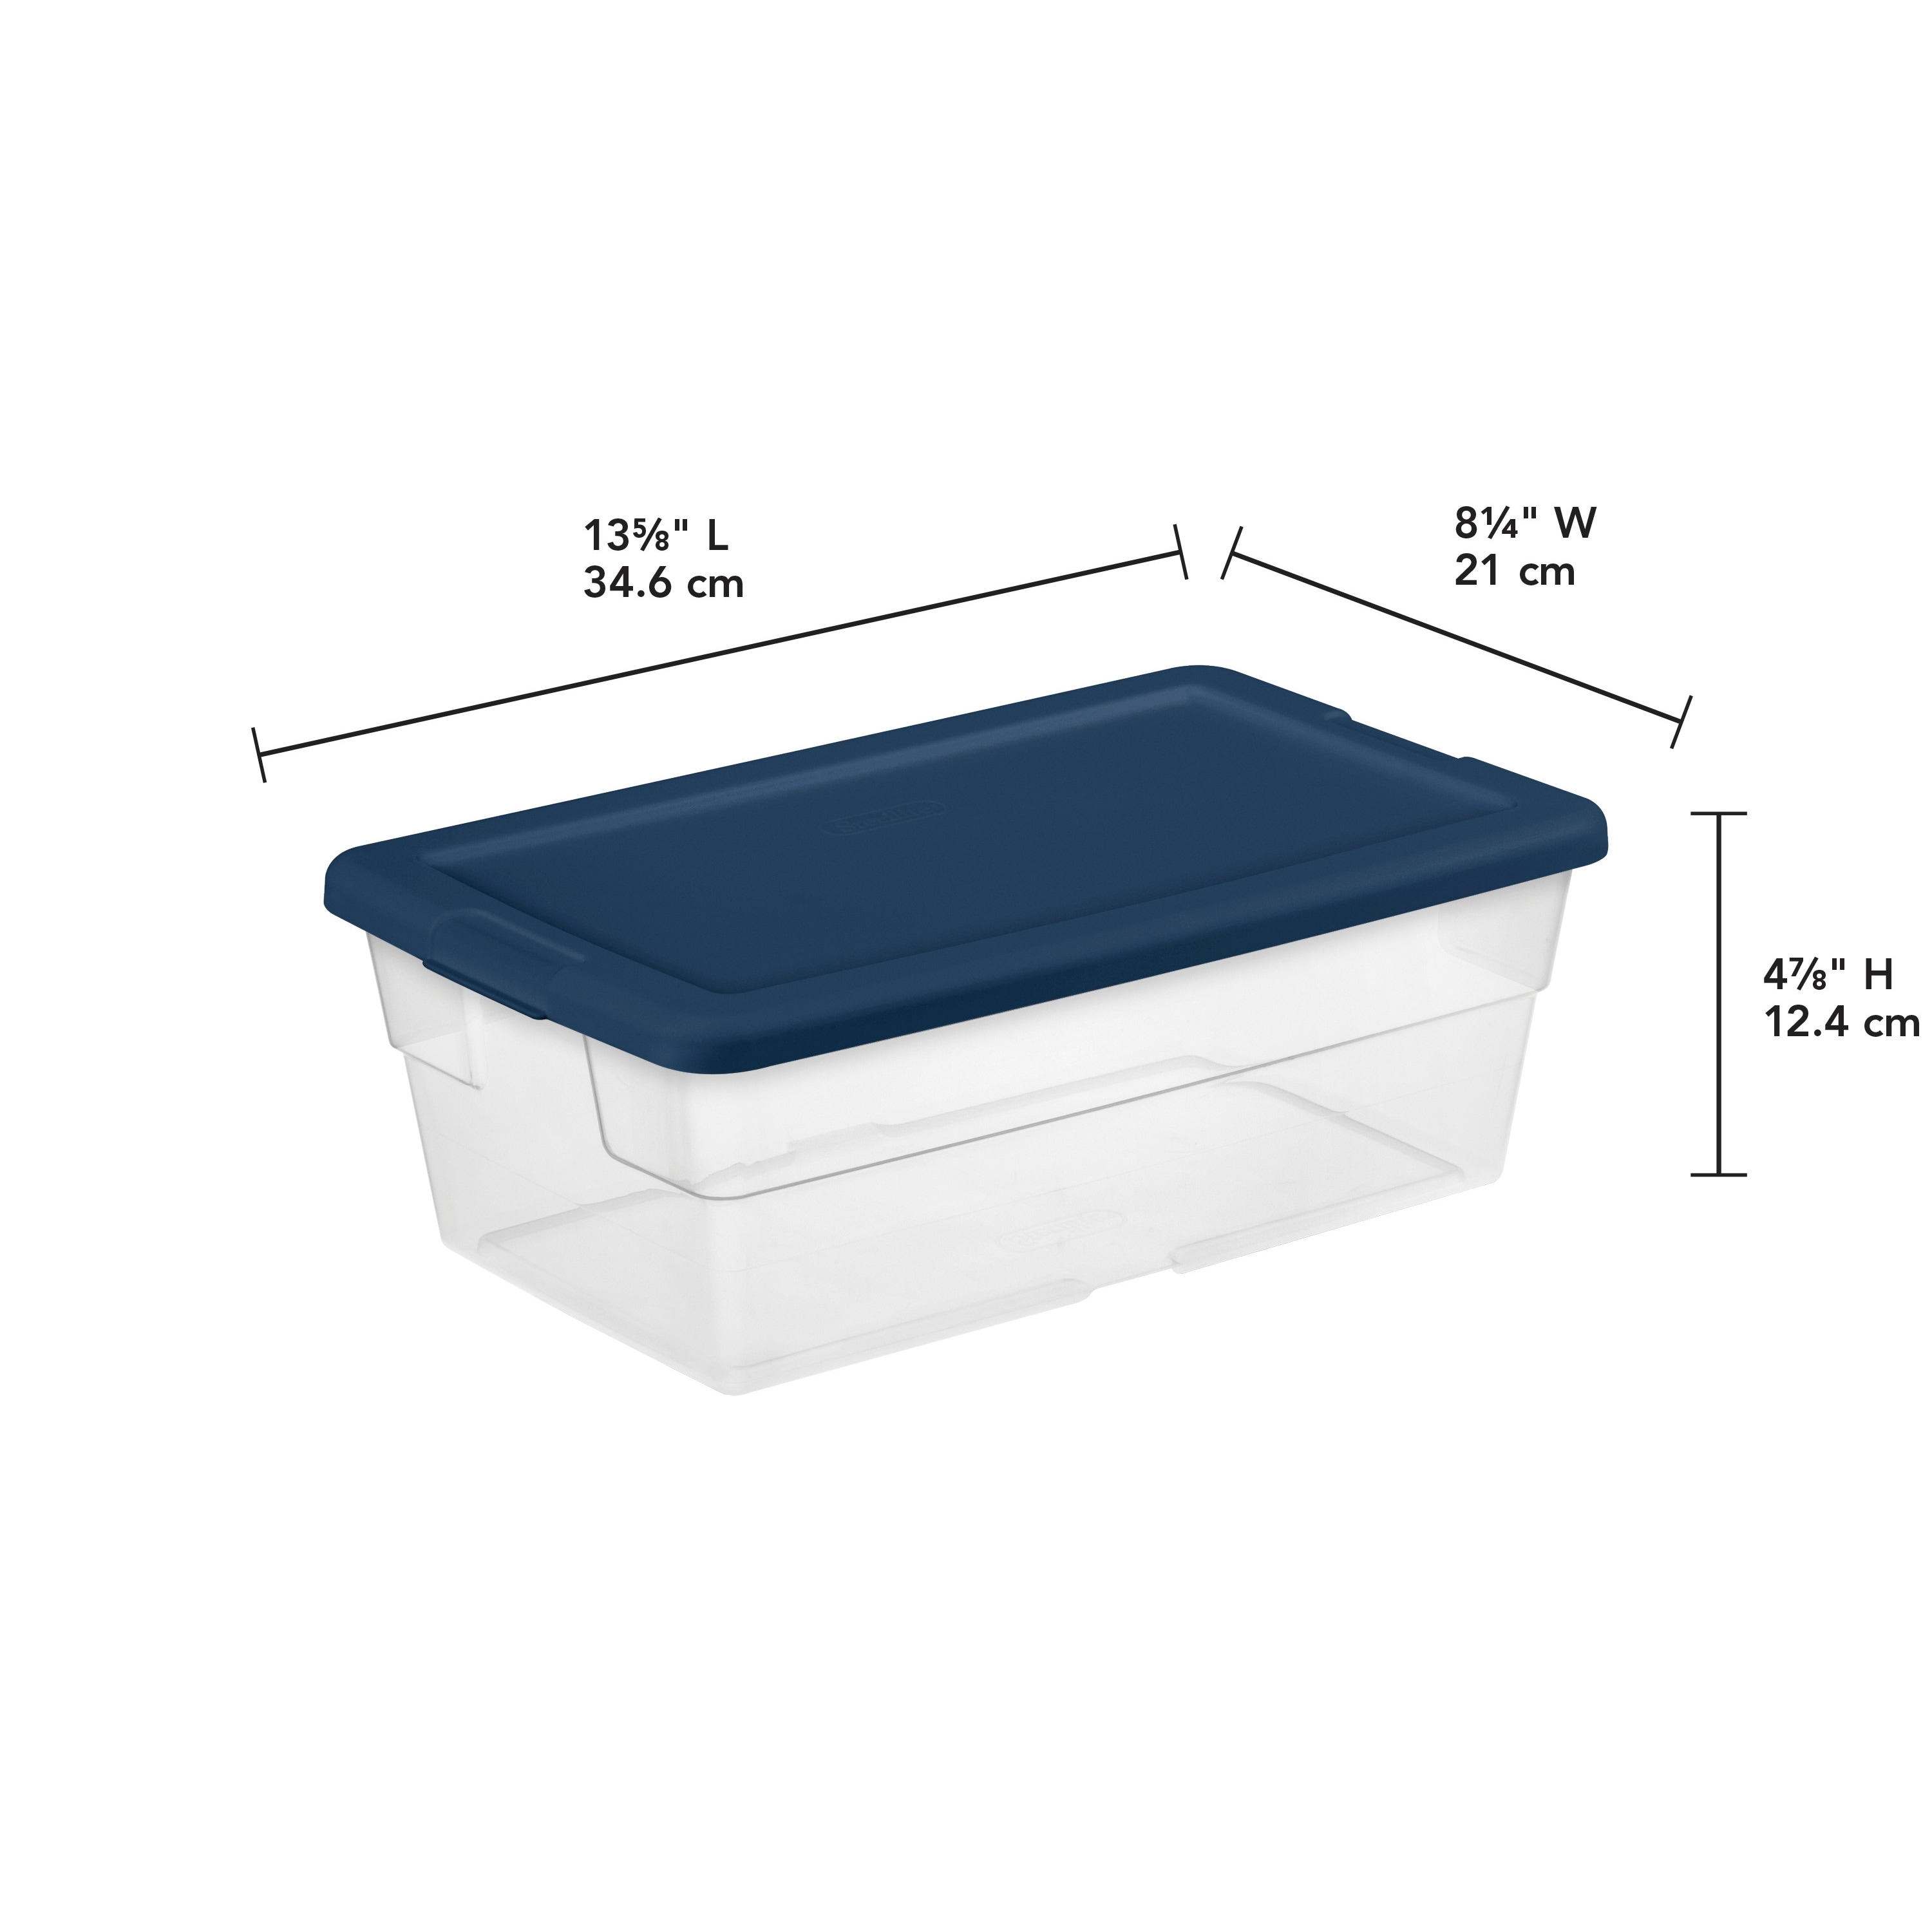 https://ak1.ostkcdn.com/images/products/is/images/direct/1fb31b111b1718d46799b2c219ded97ebba4e56d/Sterilite-Stackable-6-Qt-Storage-Box-Container%2C-Clear%2C-Marine-Blue-Lid-%2860-Pack%29.jpg